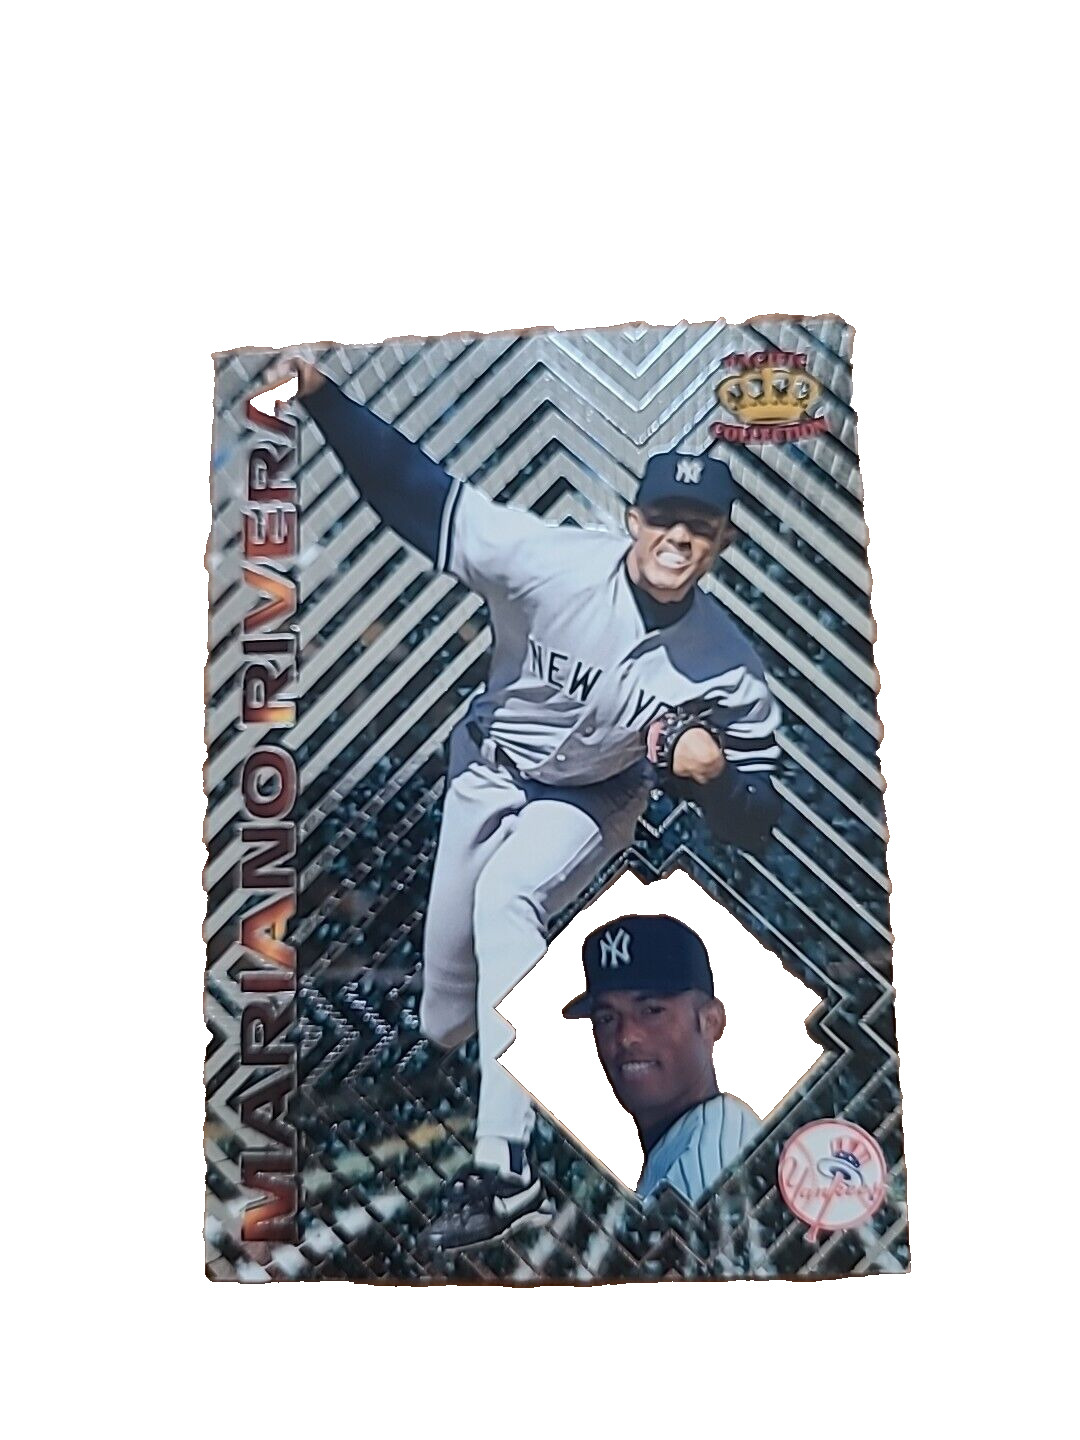 Mariano Rivera Yankees 1997 Pacific Card #54 Unanimous HOF 1st Ballot Excellent